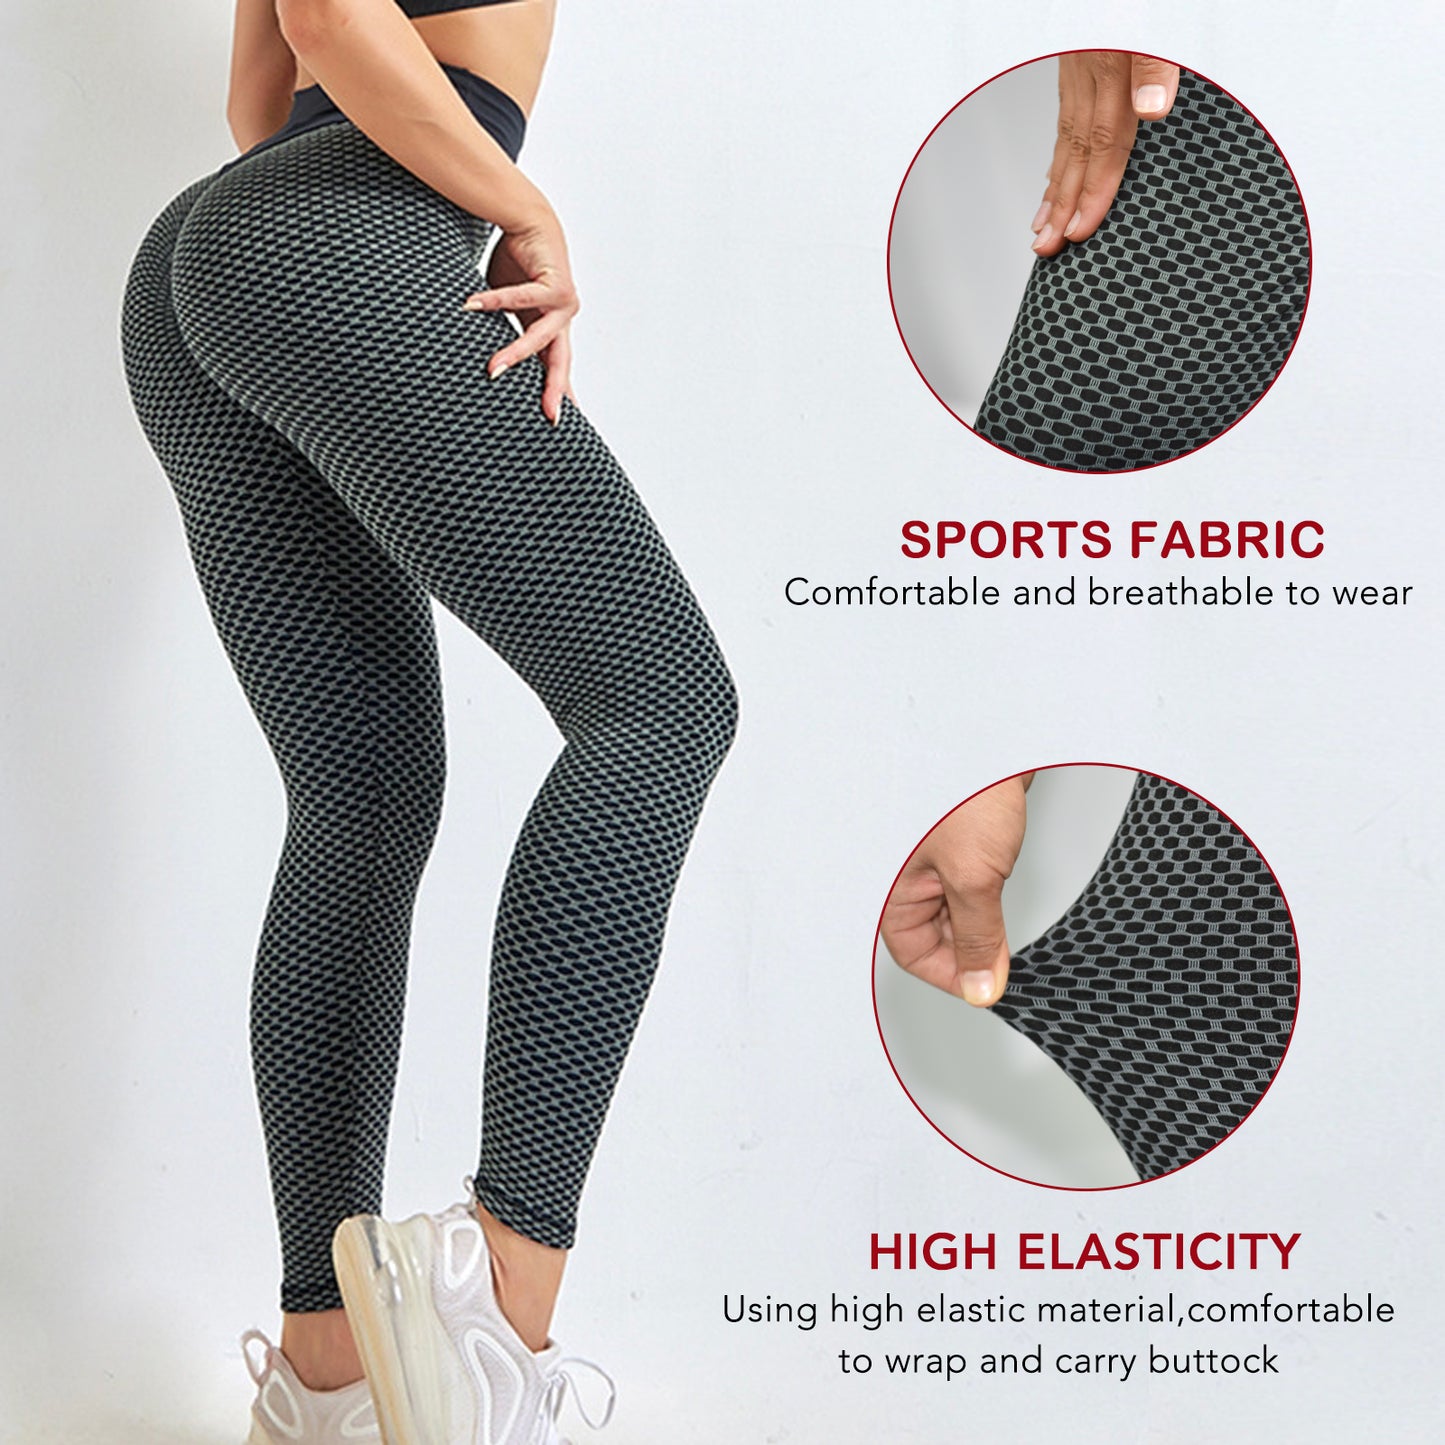 Butt Lifting yoga or Workout Tights High Waist